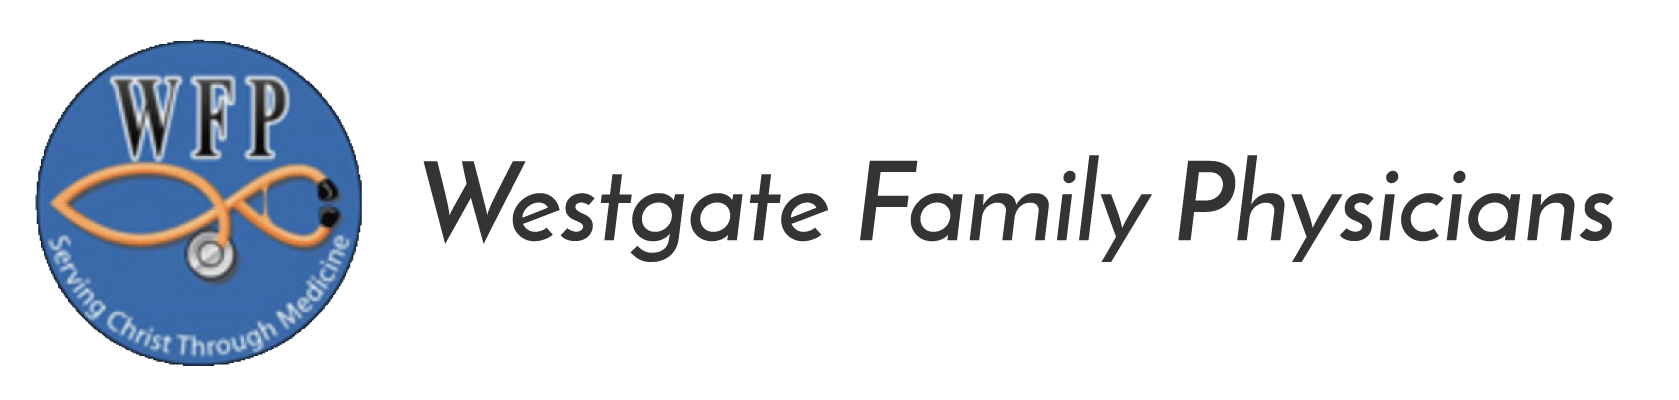 Westgate Family Physicians Logo